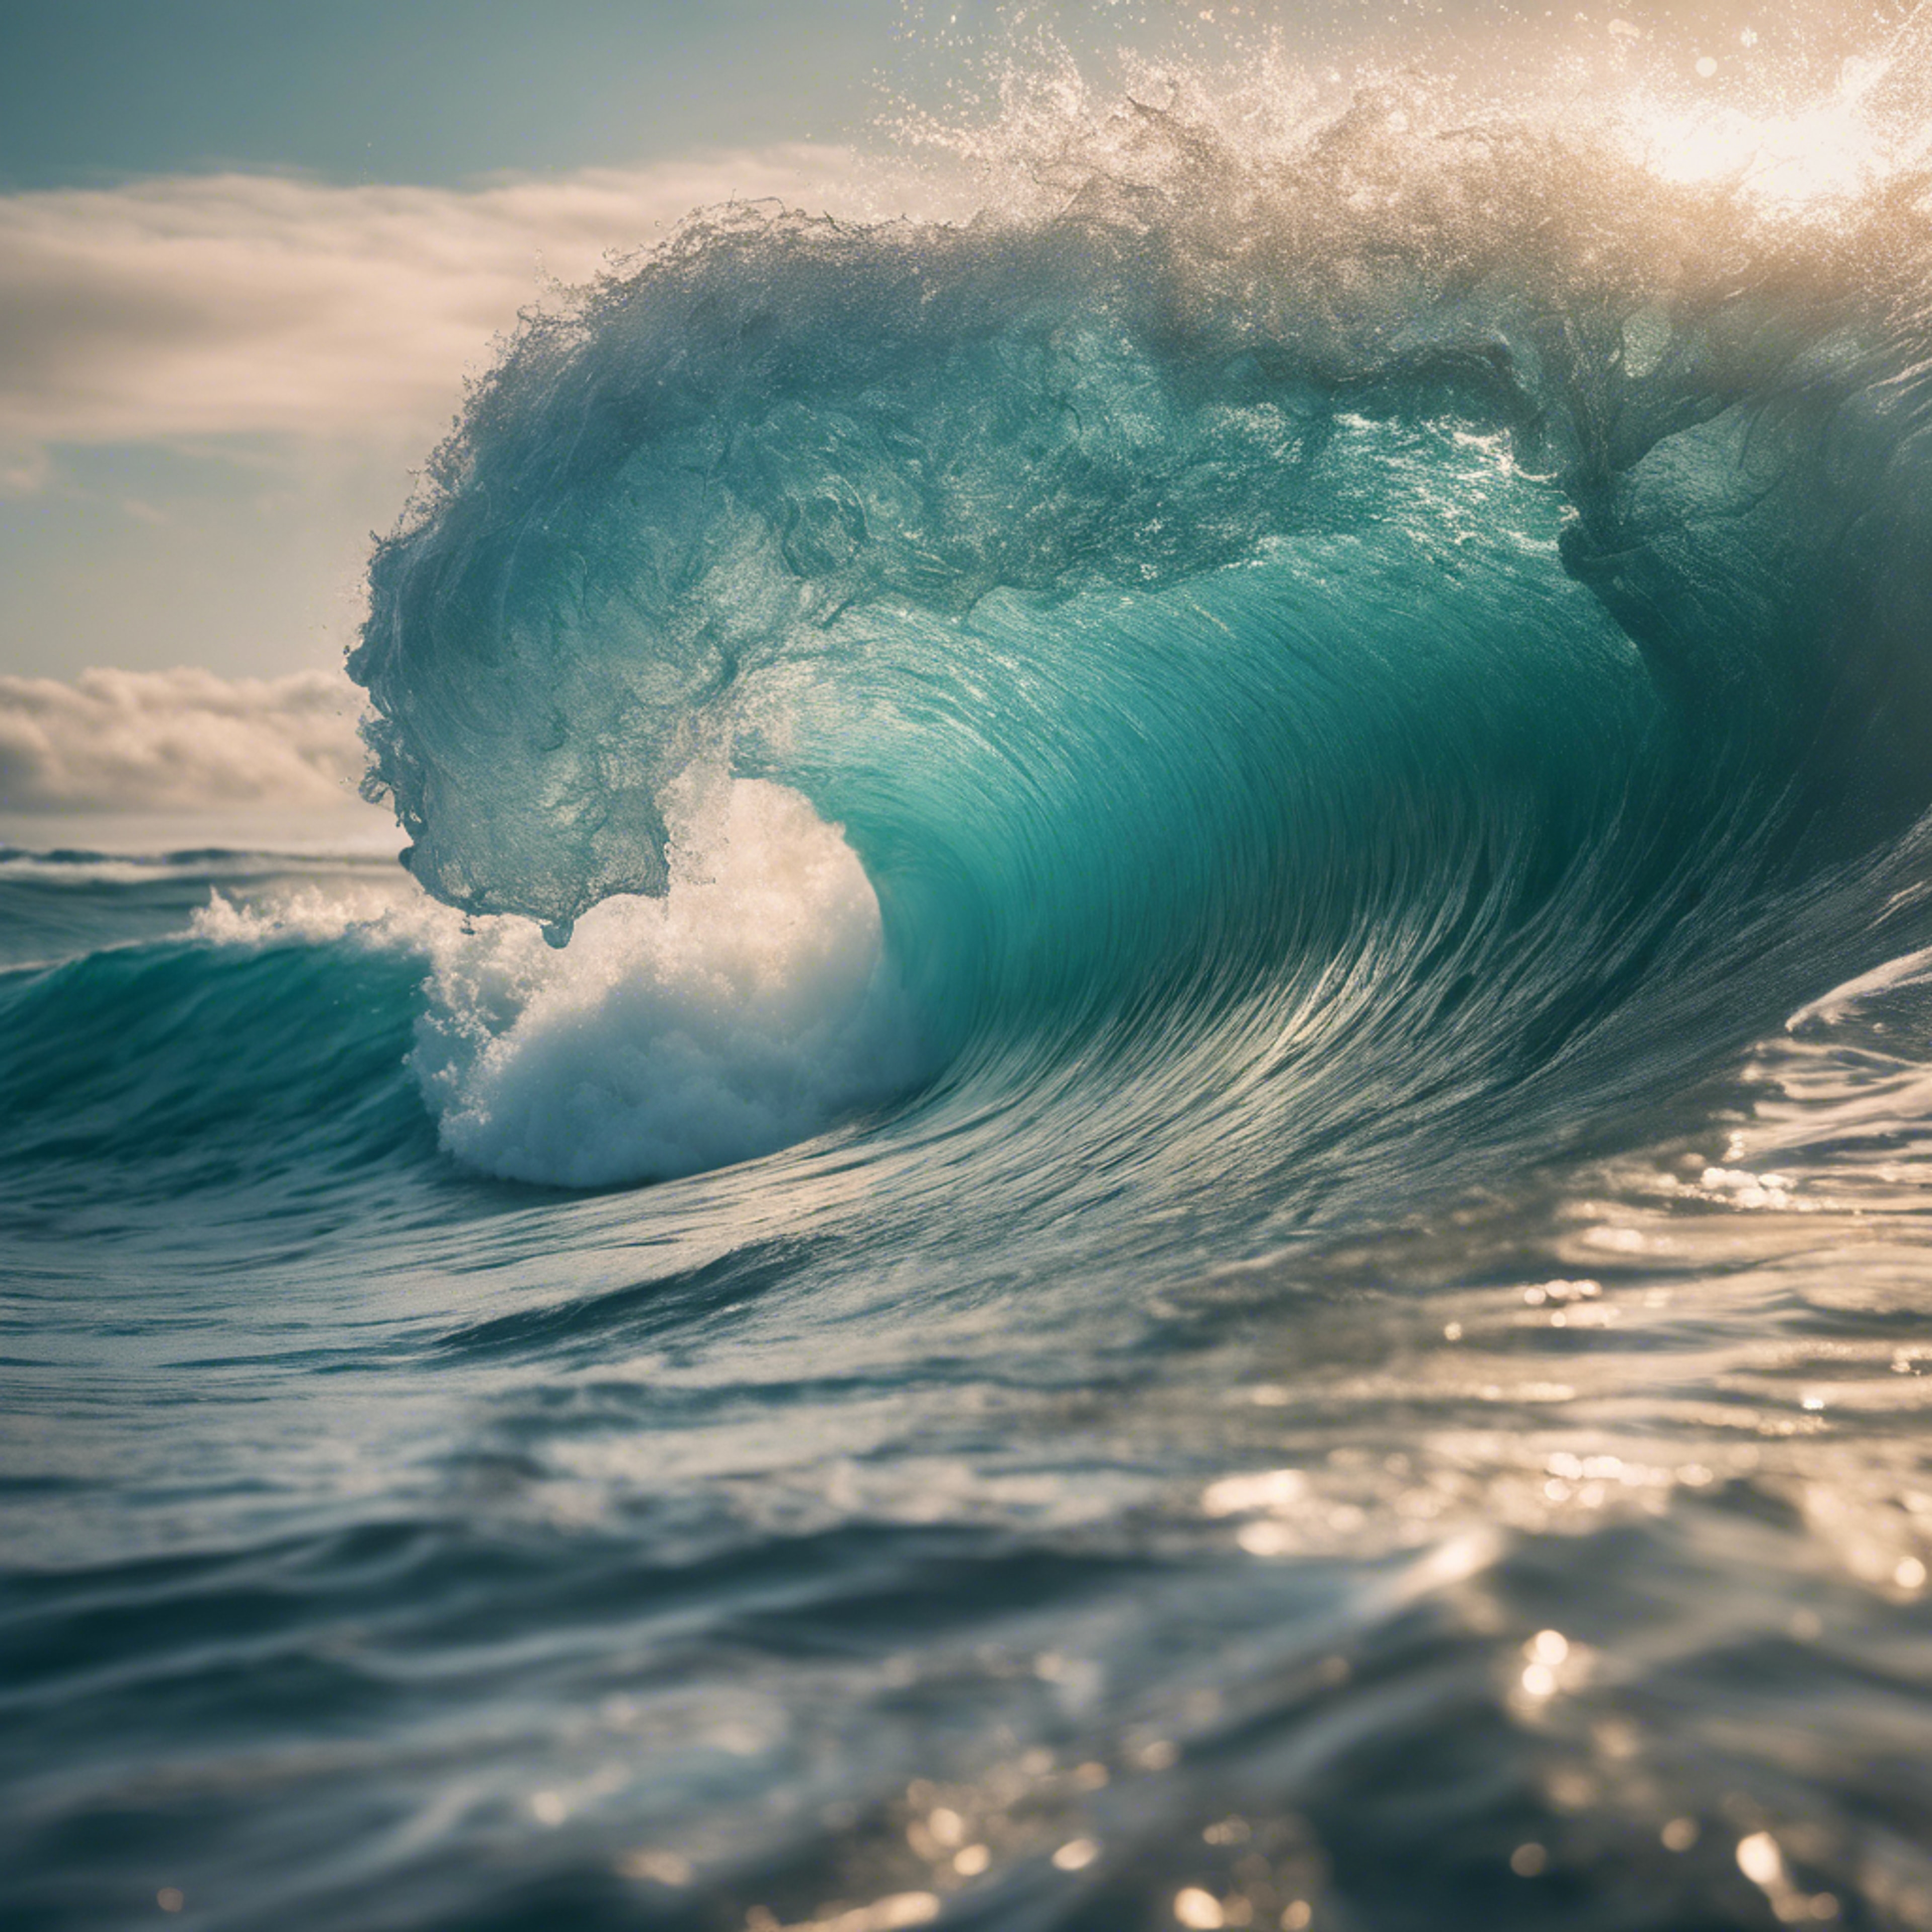 A powerful ocean wave about to crash, casting a cool teal hue. Tapet[600fa377246440af9acb]